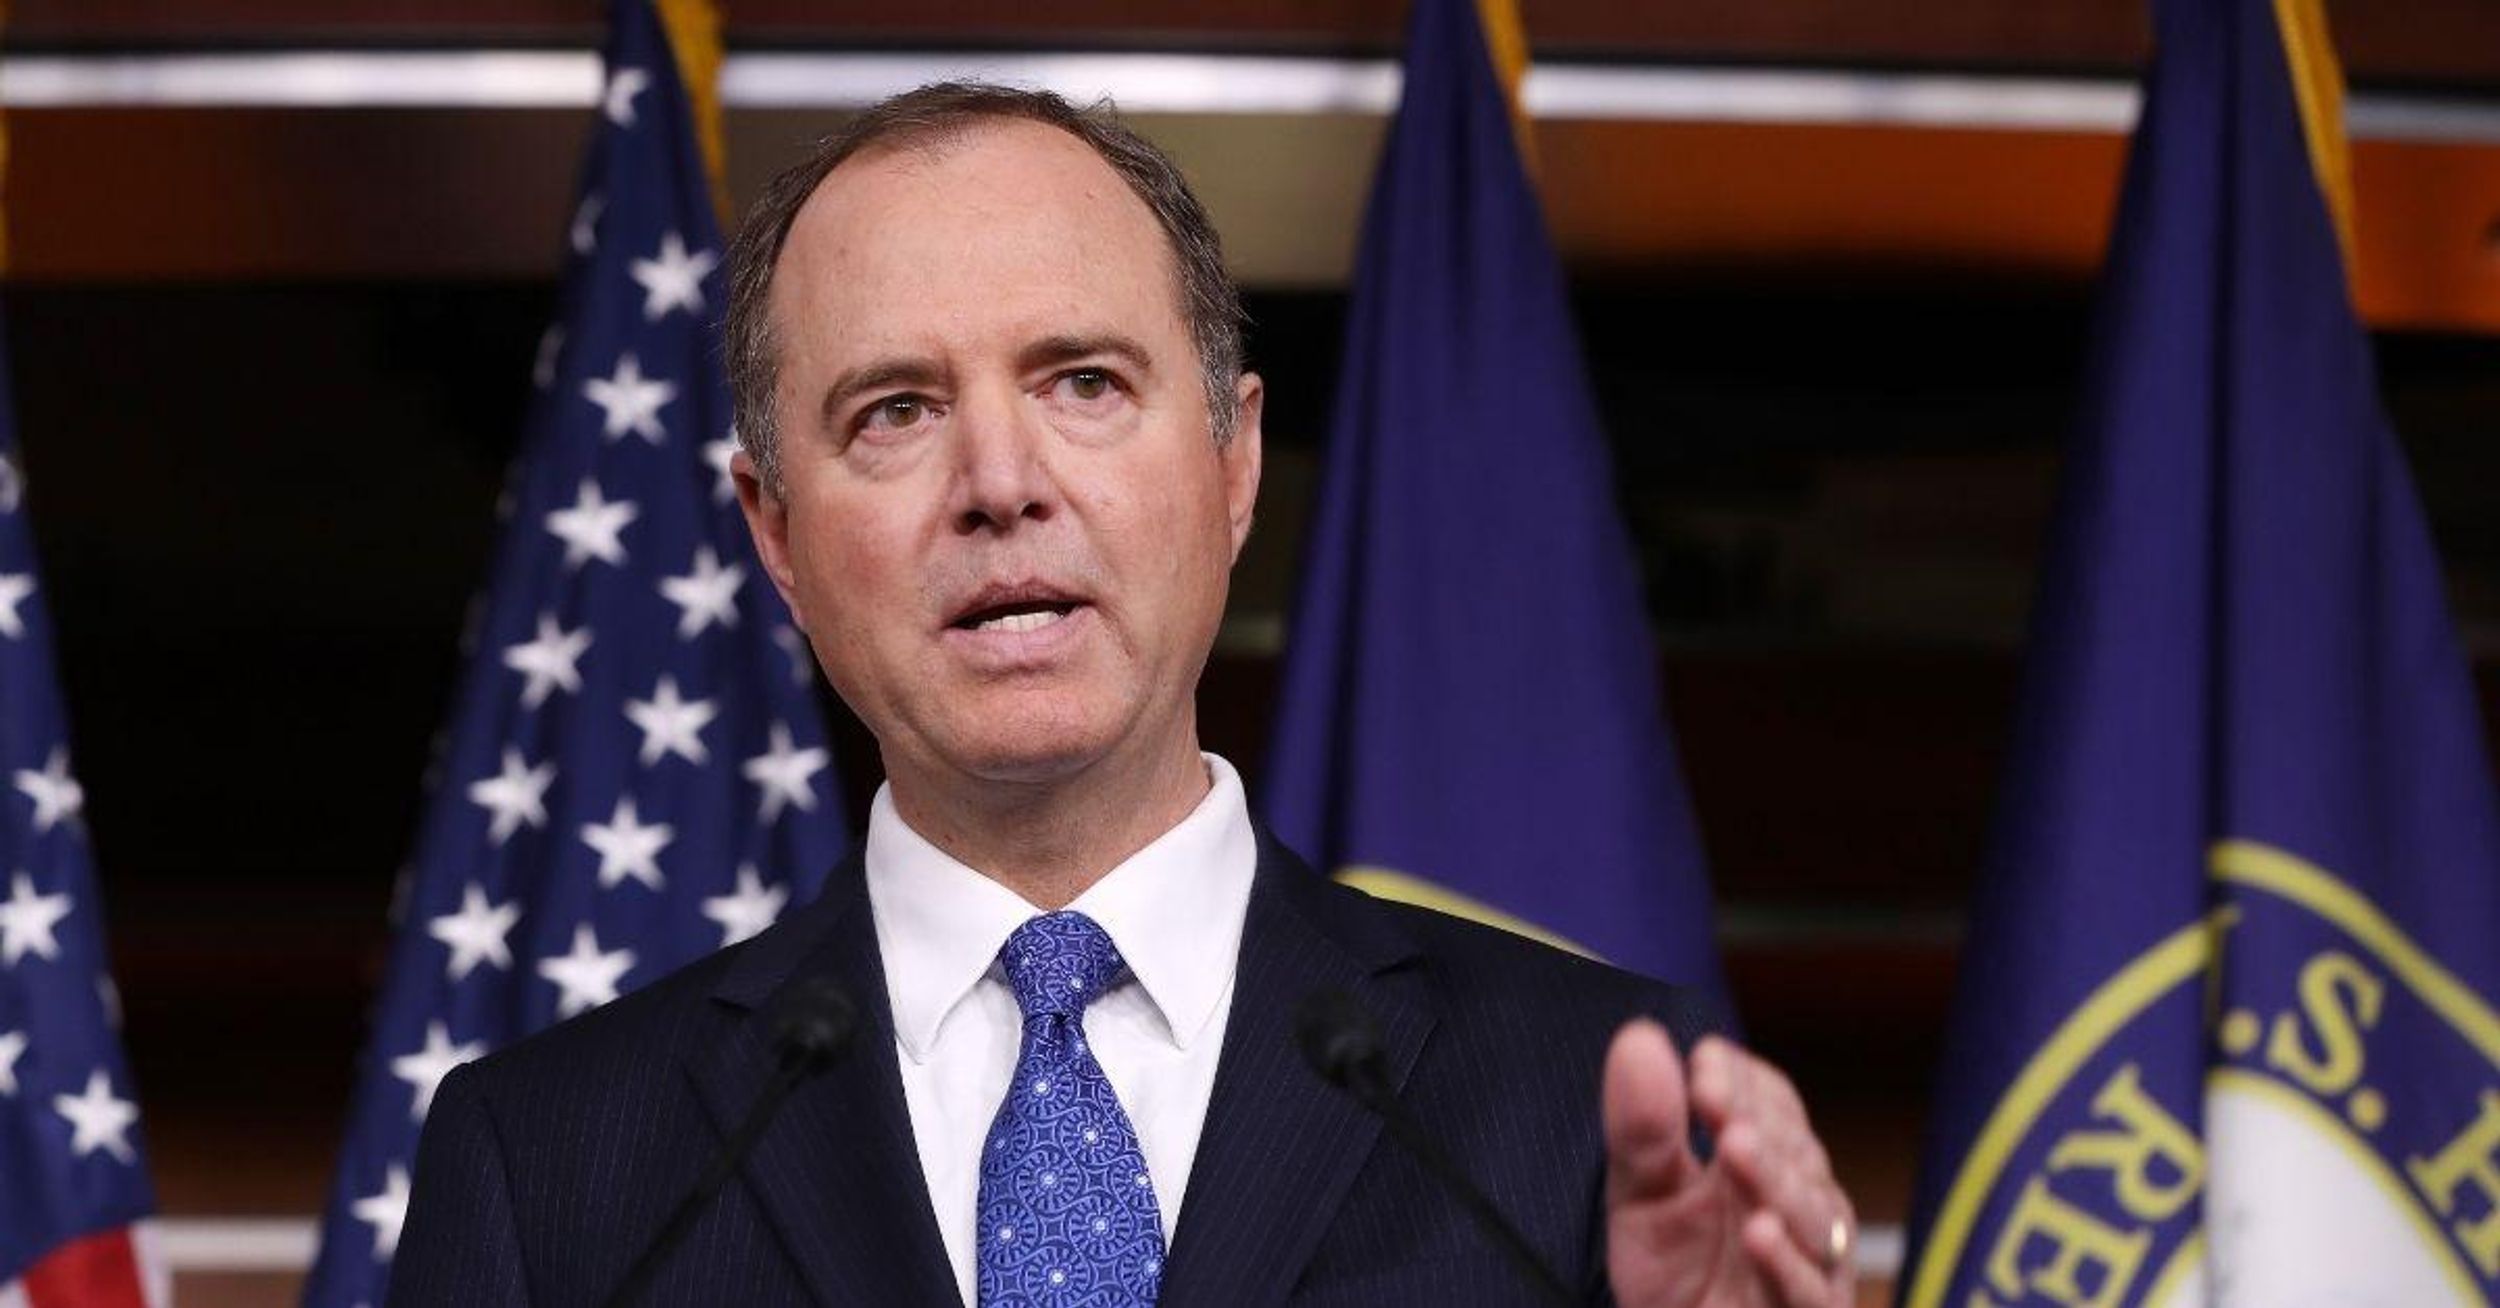 Rep. Adam Schiff Schools 'Confused' Republicans About The Actual Meaning Of Unity In Fiery Tweet